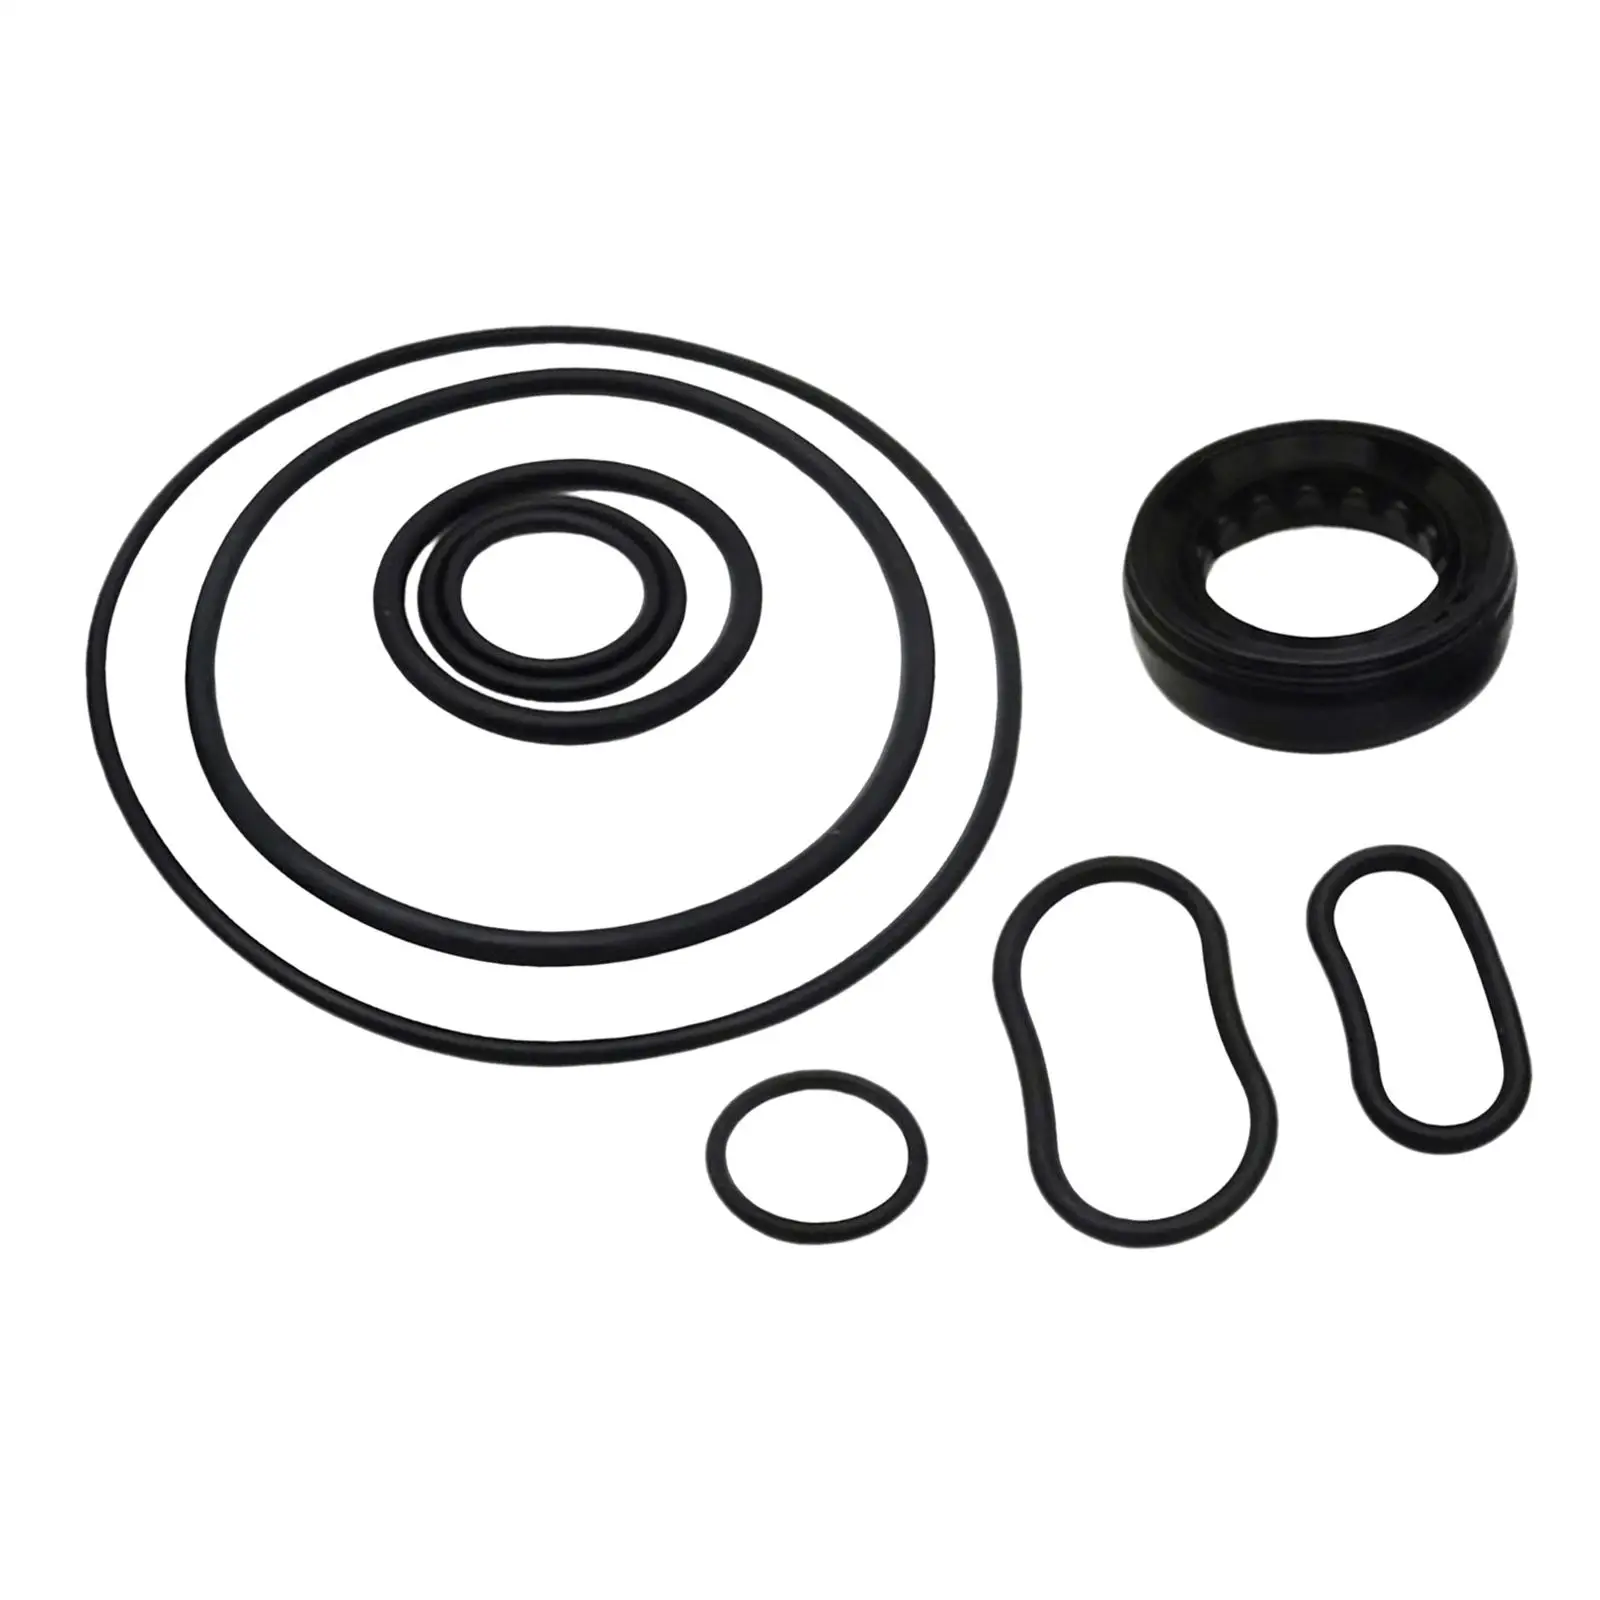 Power Steering Pump Seal Kit 06539-Pnc-003 Replacement for Honda Accord